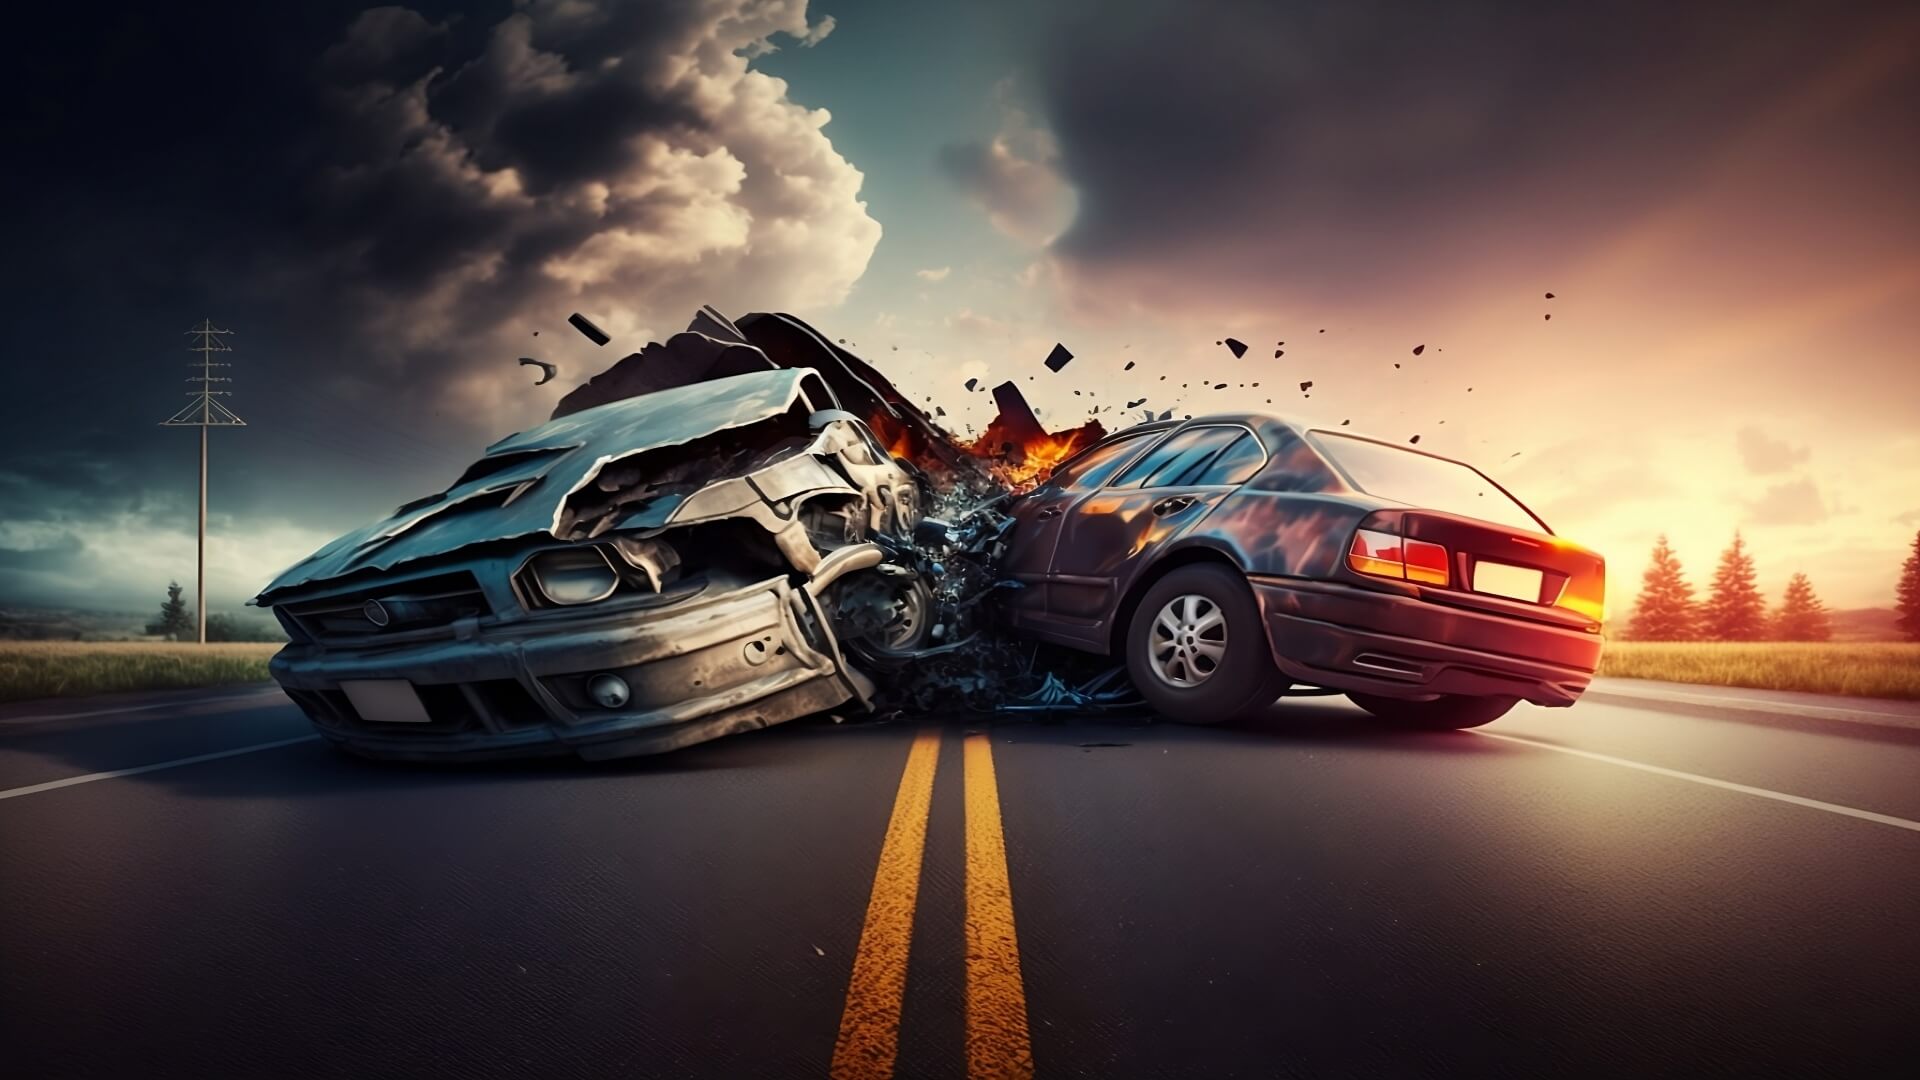 4 Common Injuries Causing Death In A Car Accident